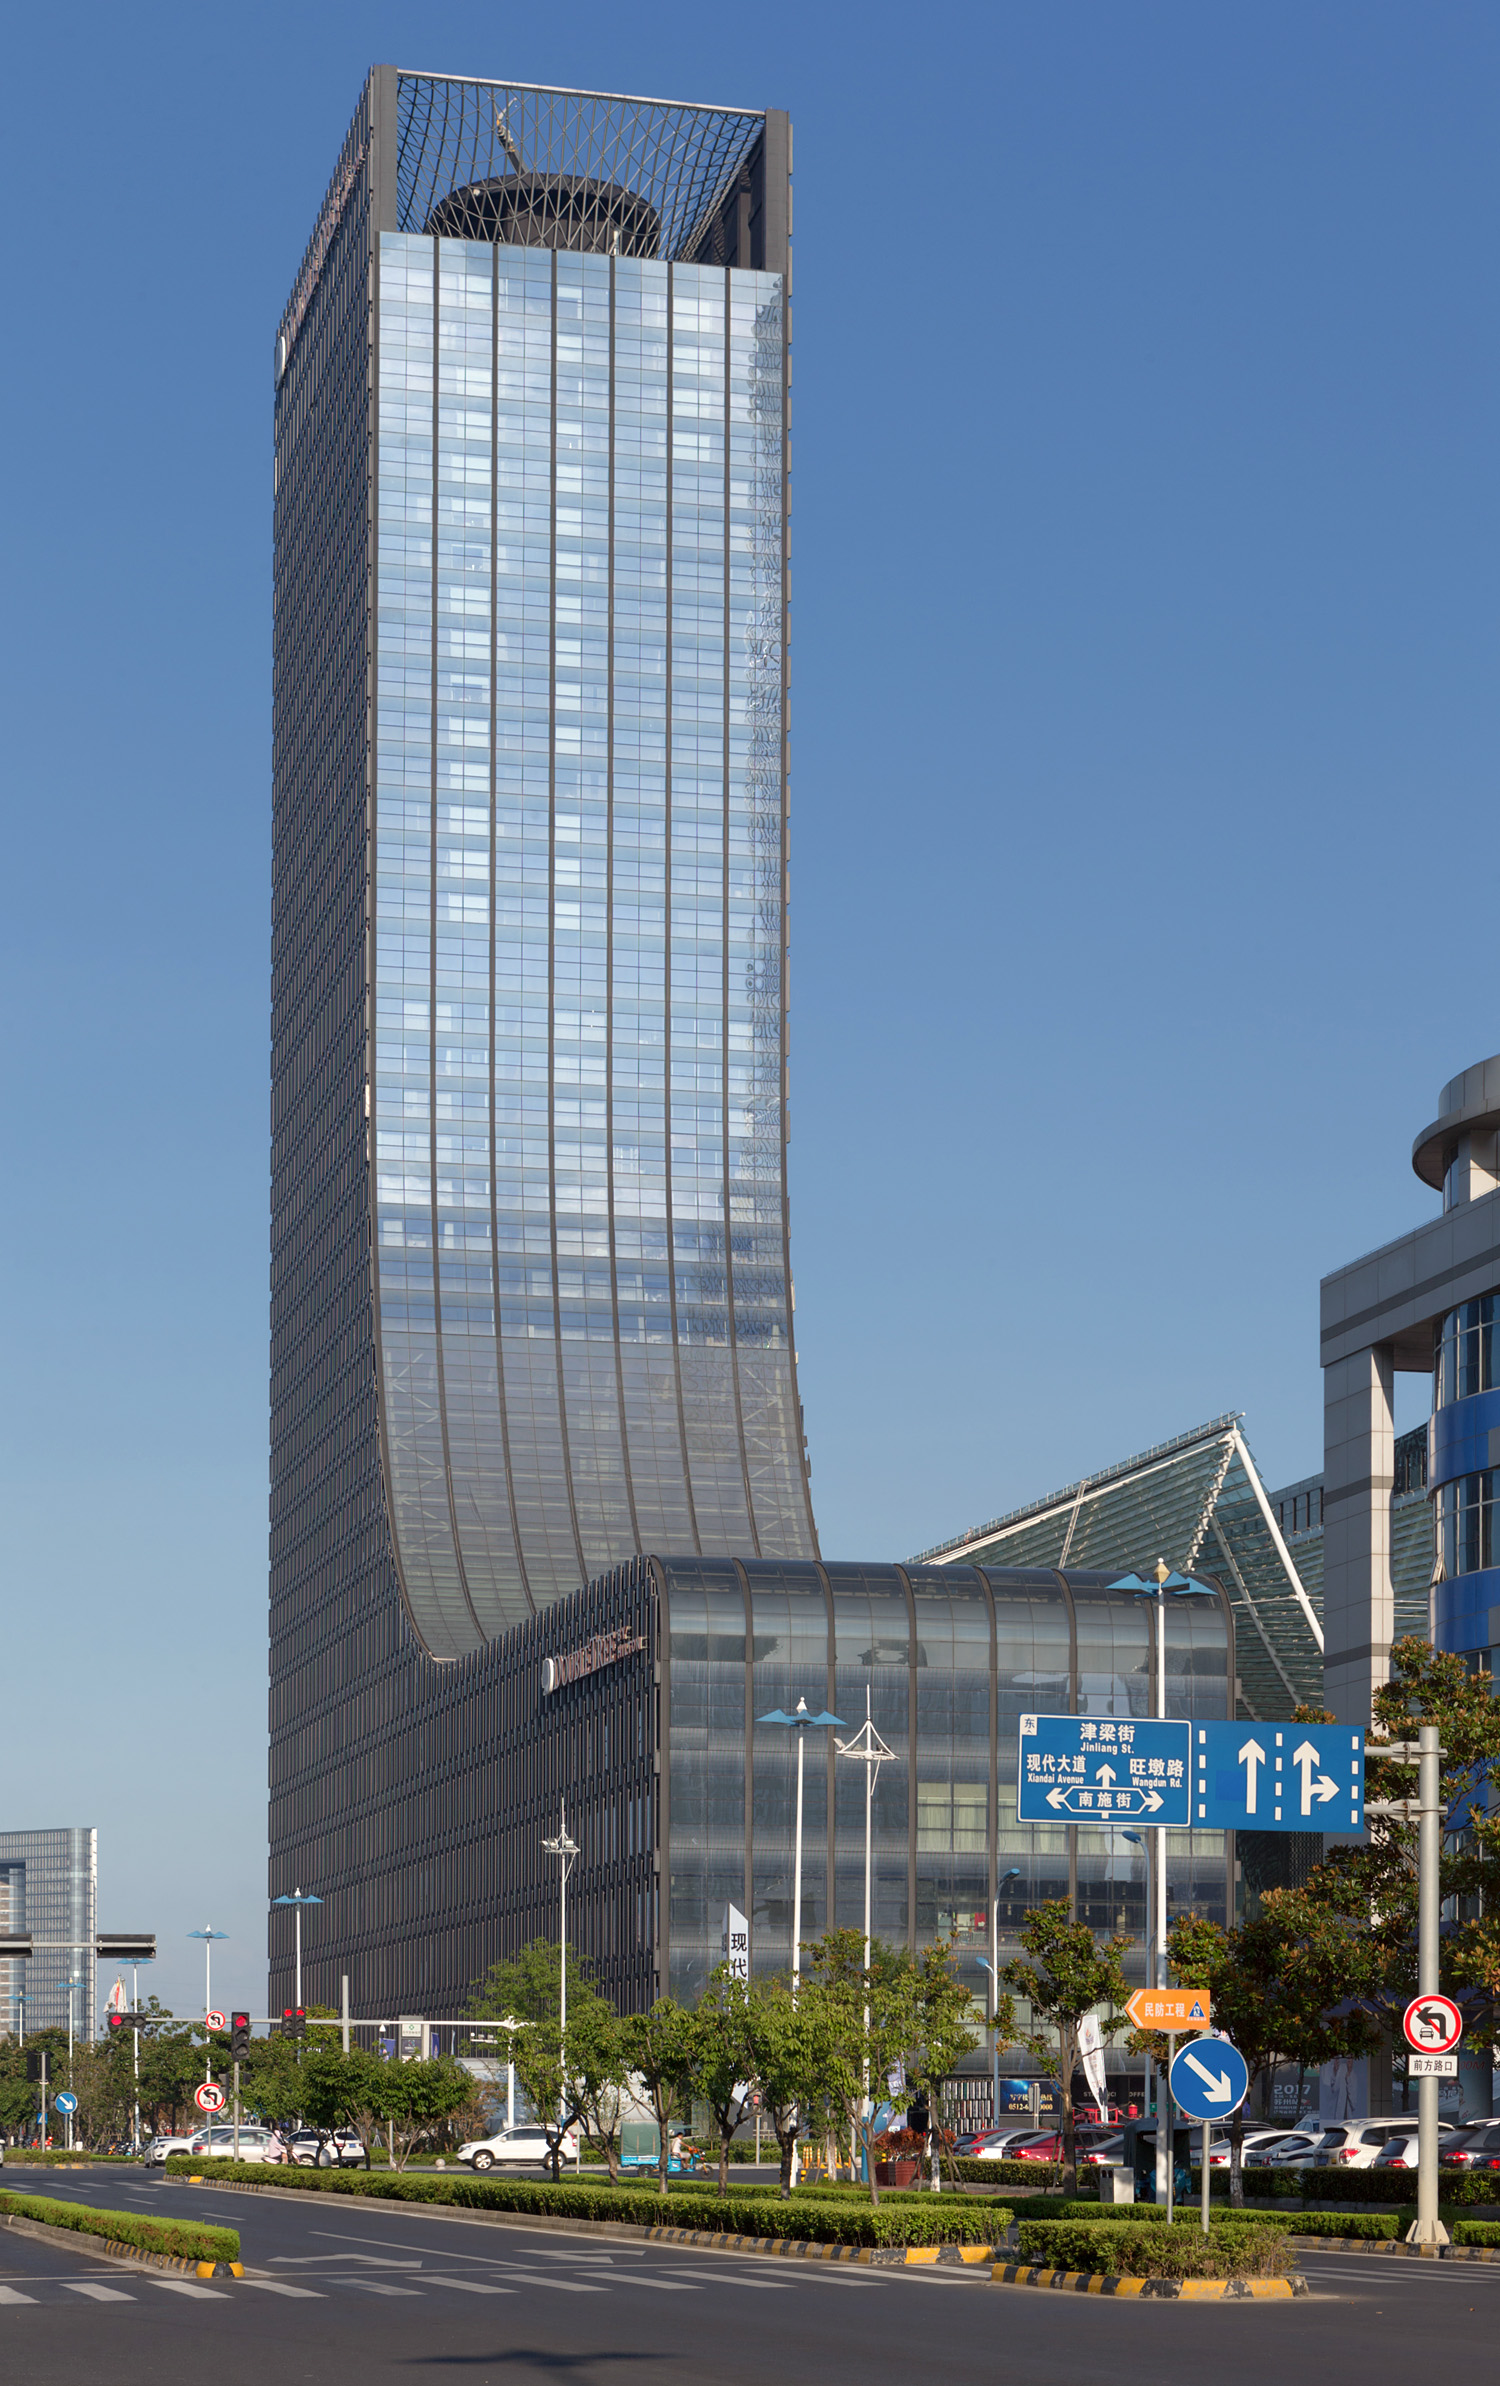 The SuzhouModern Media Plaza Tower 2, Suzhou - View from the west. © Mathias Beinling